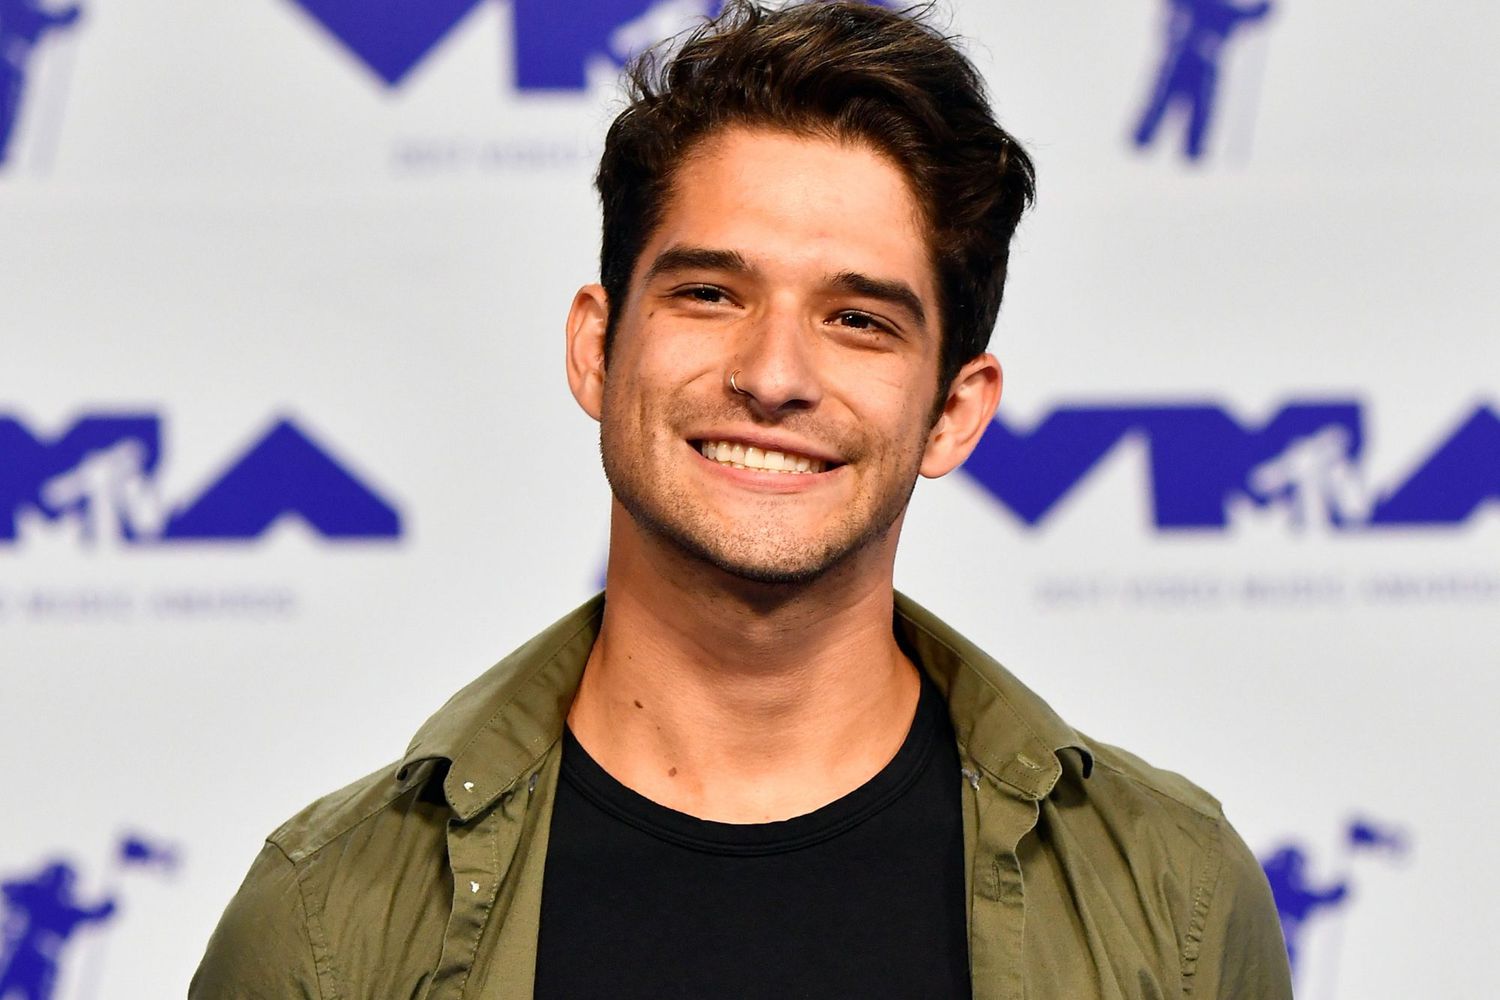 Tyler Posey wearing shirt with a big smile at an event